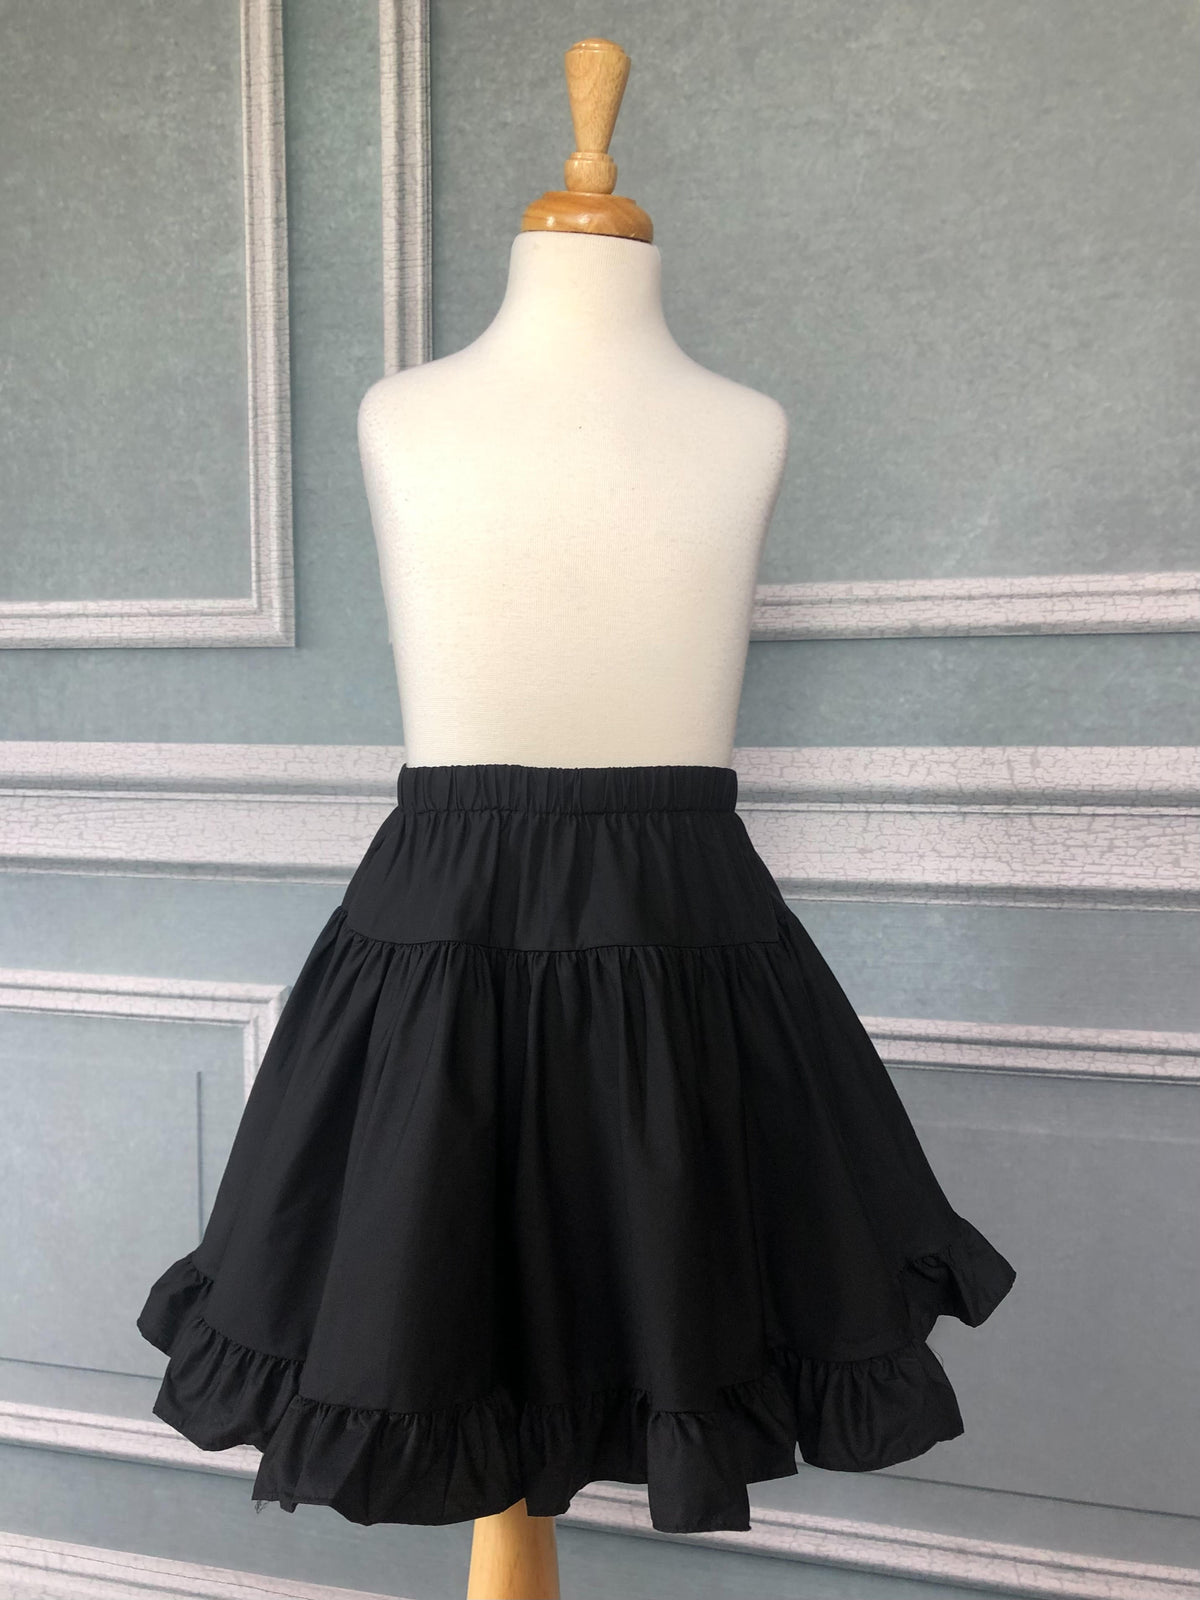 100% cotton Pettiskirt with ruffle layers in Black